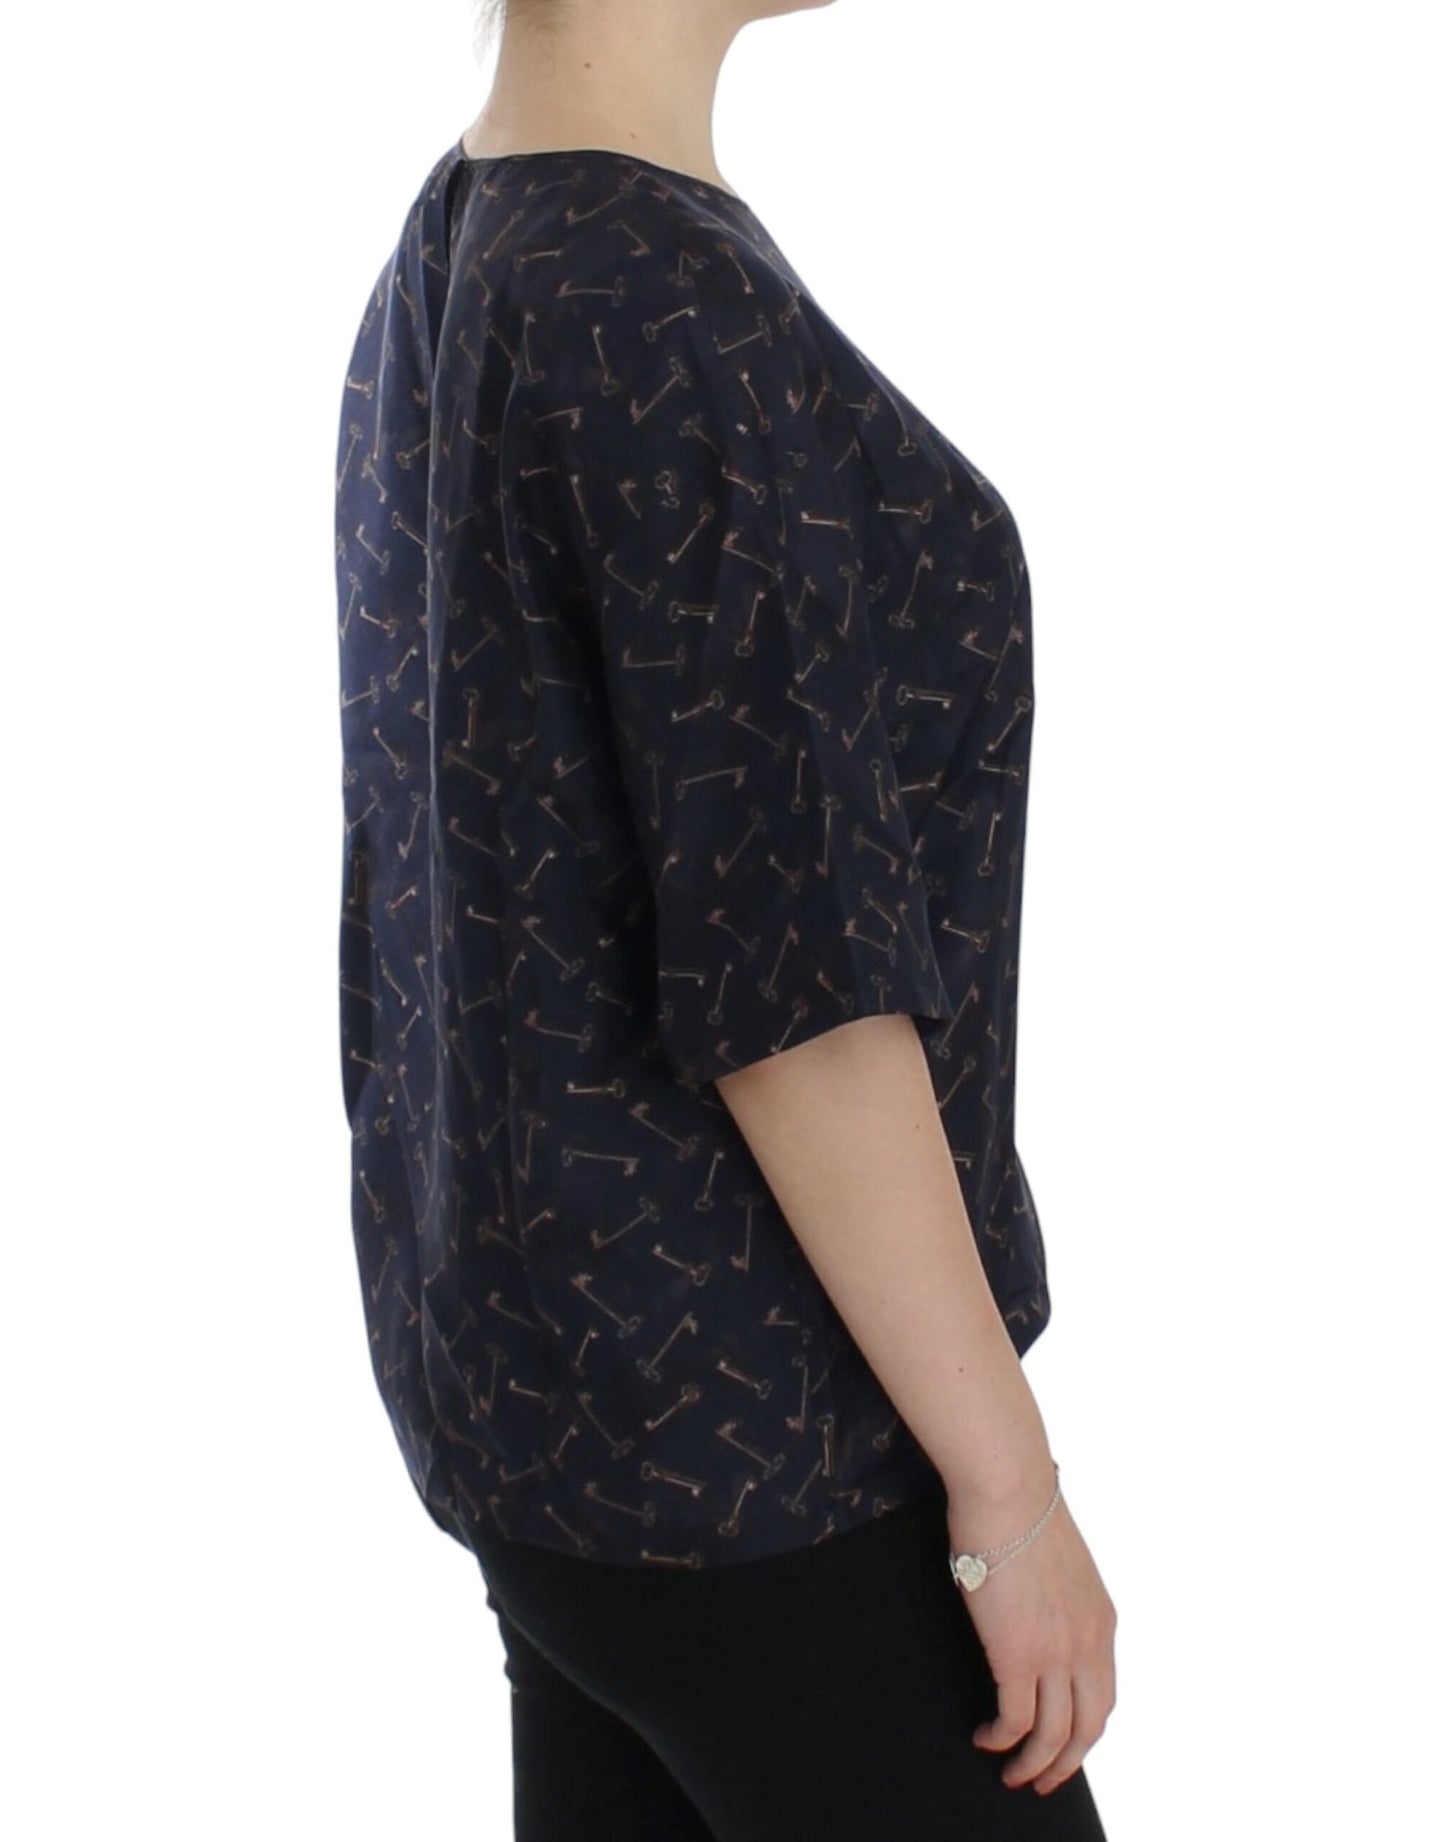 Enchanted Sicily Silk Blouse with Gold Keys Print